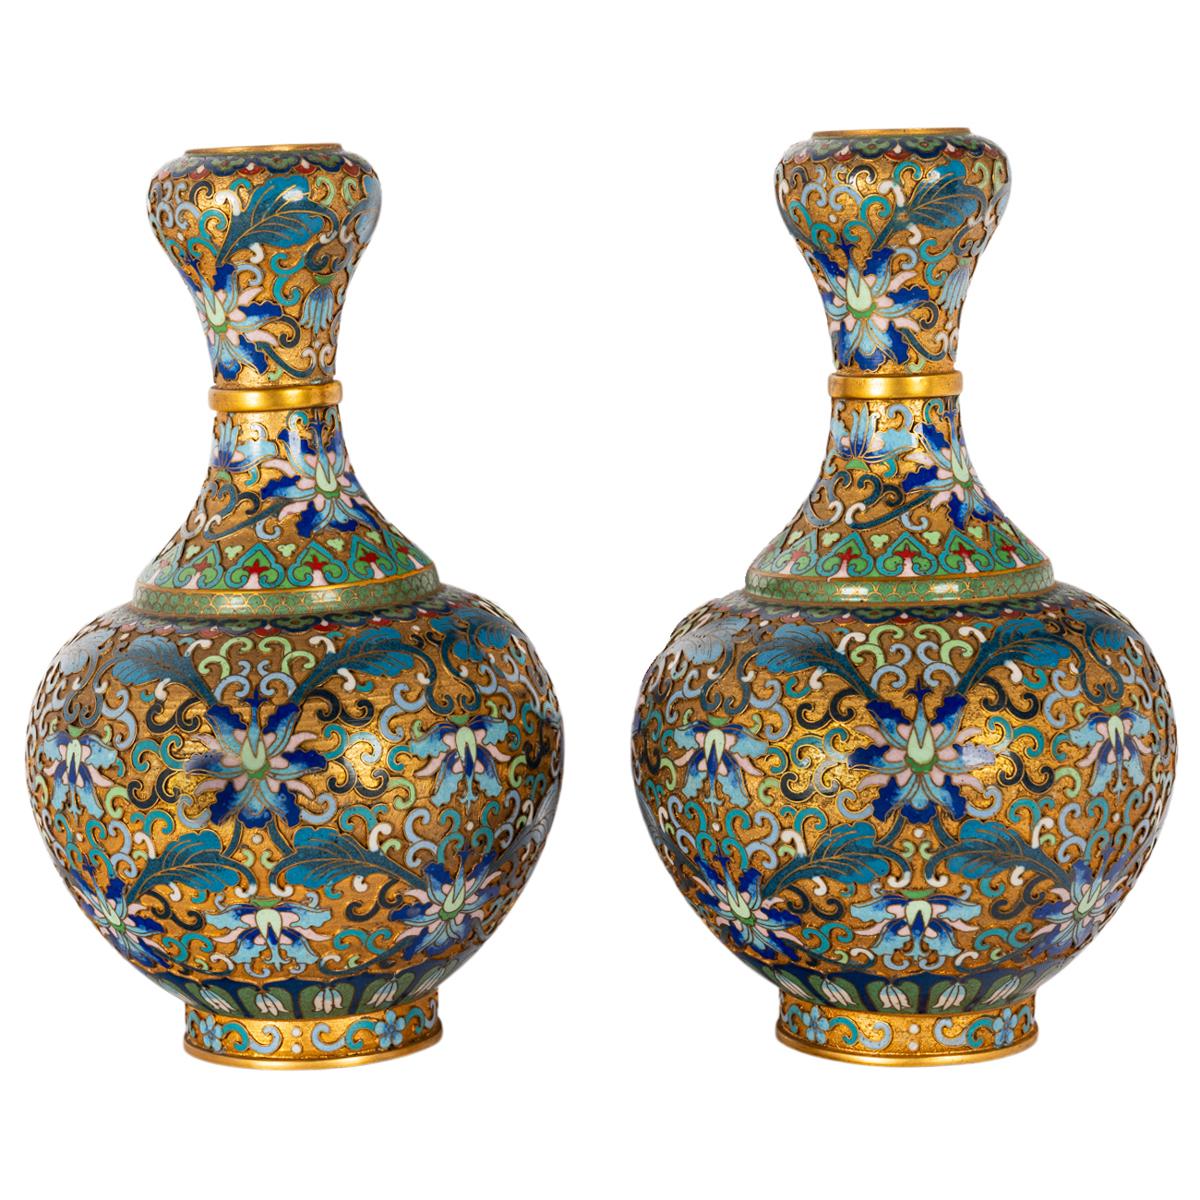 Early 20th Century Pair Antique Chinese Qing Republic Dynasty Cloisonné Champlevé Vases 1910